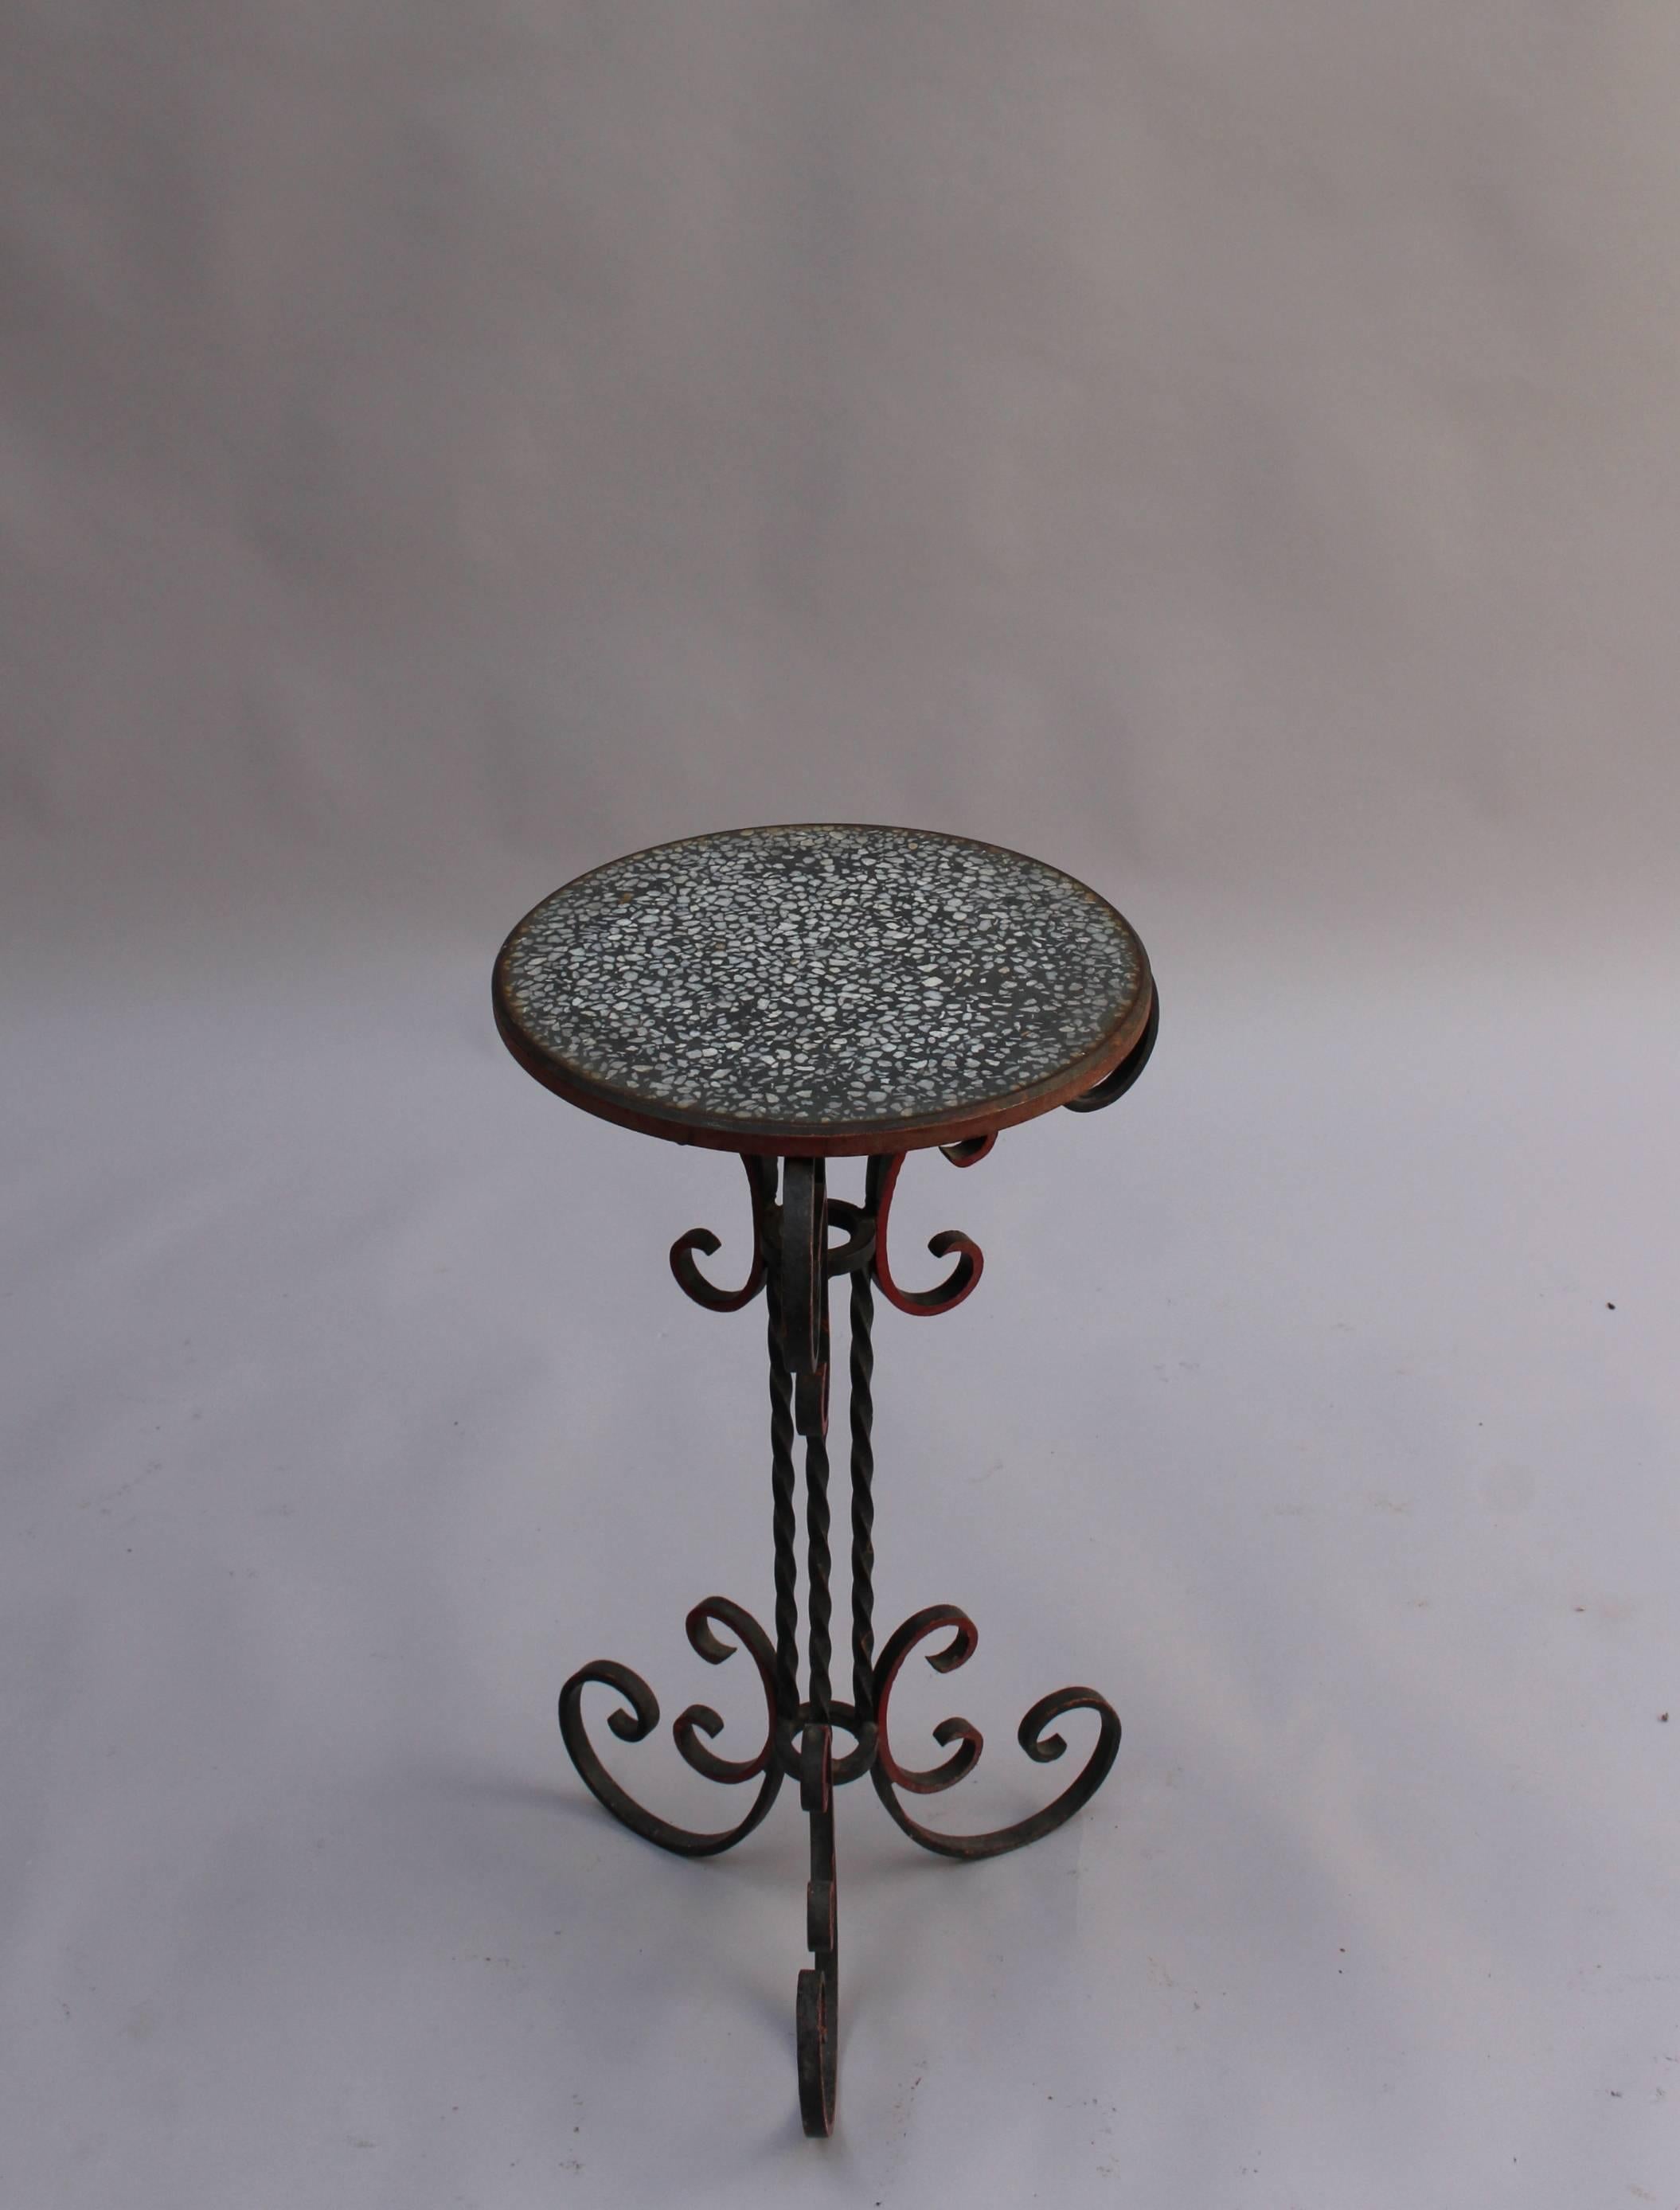 A 1940s wrought iron pedestal side table with round Terrazzo top.
(Vase in the last picture is not included in the price.)